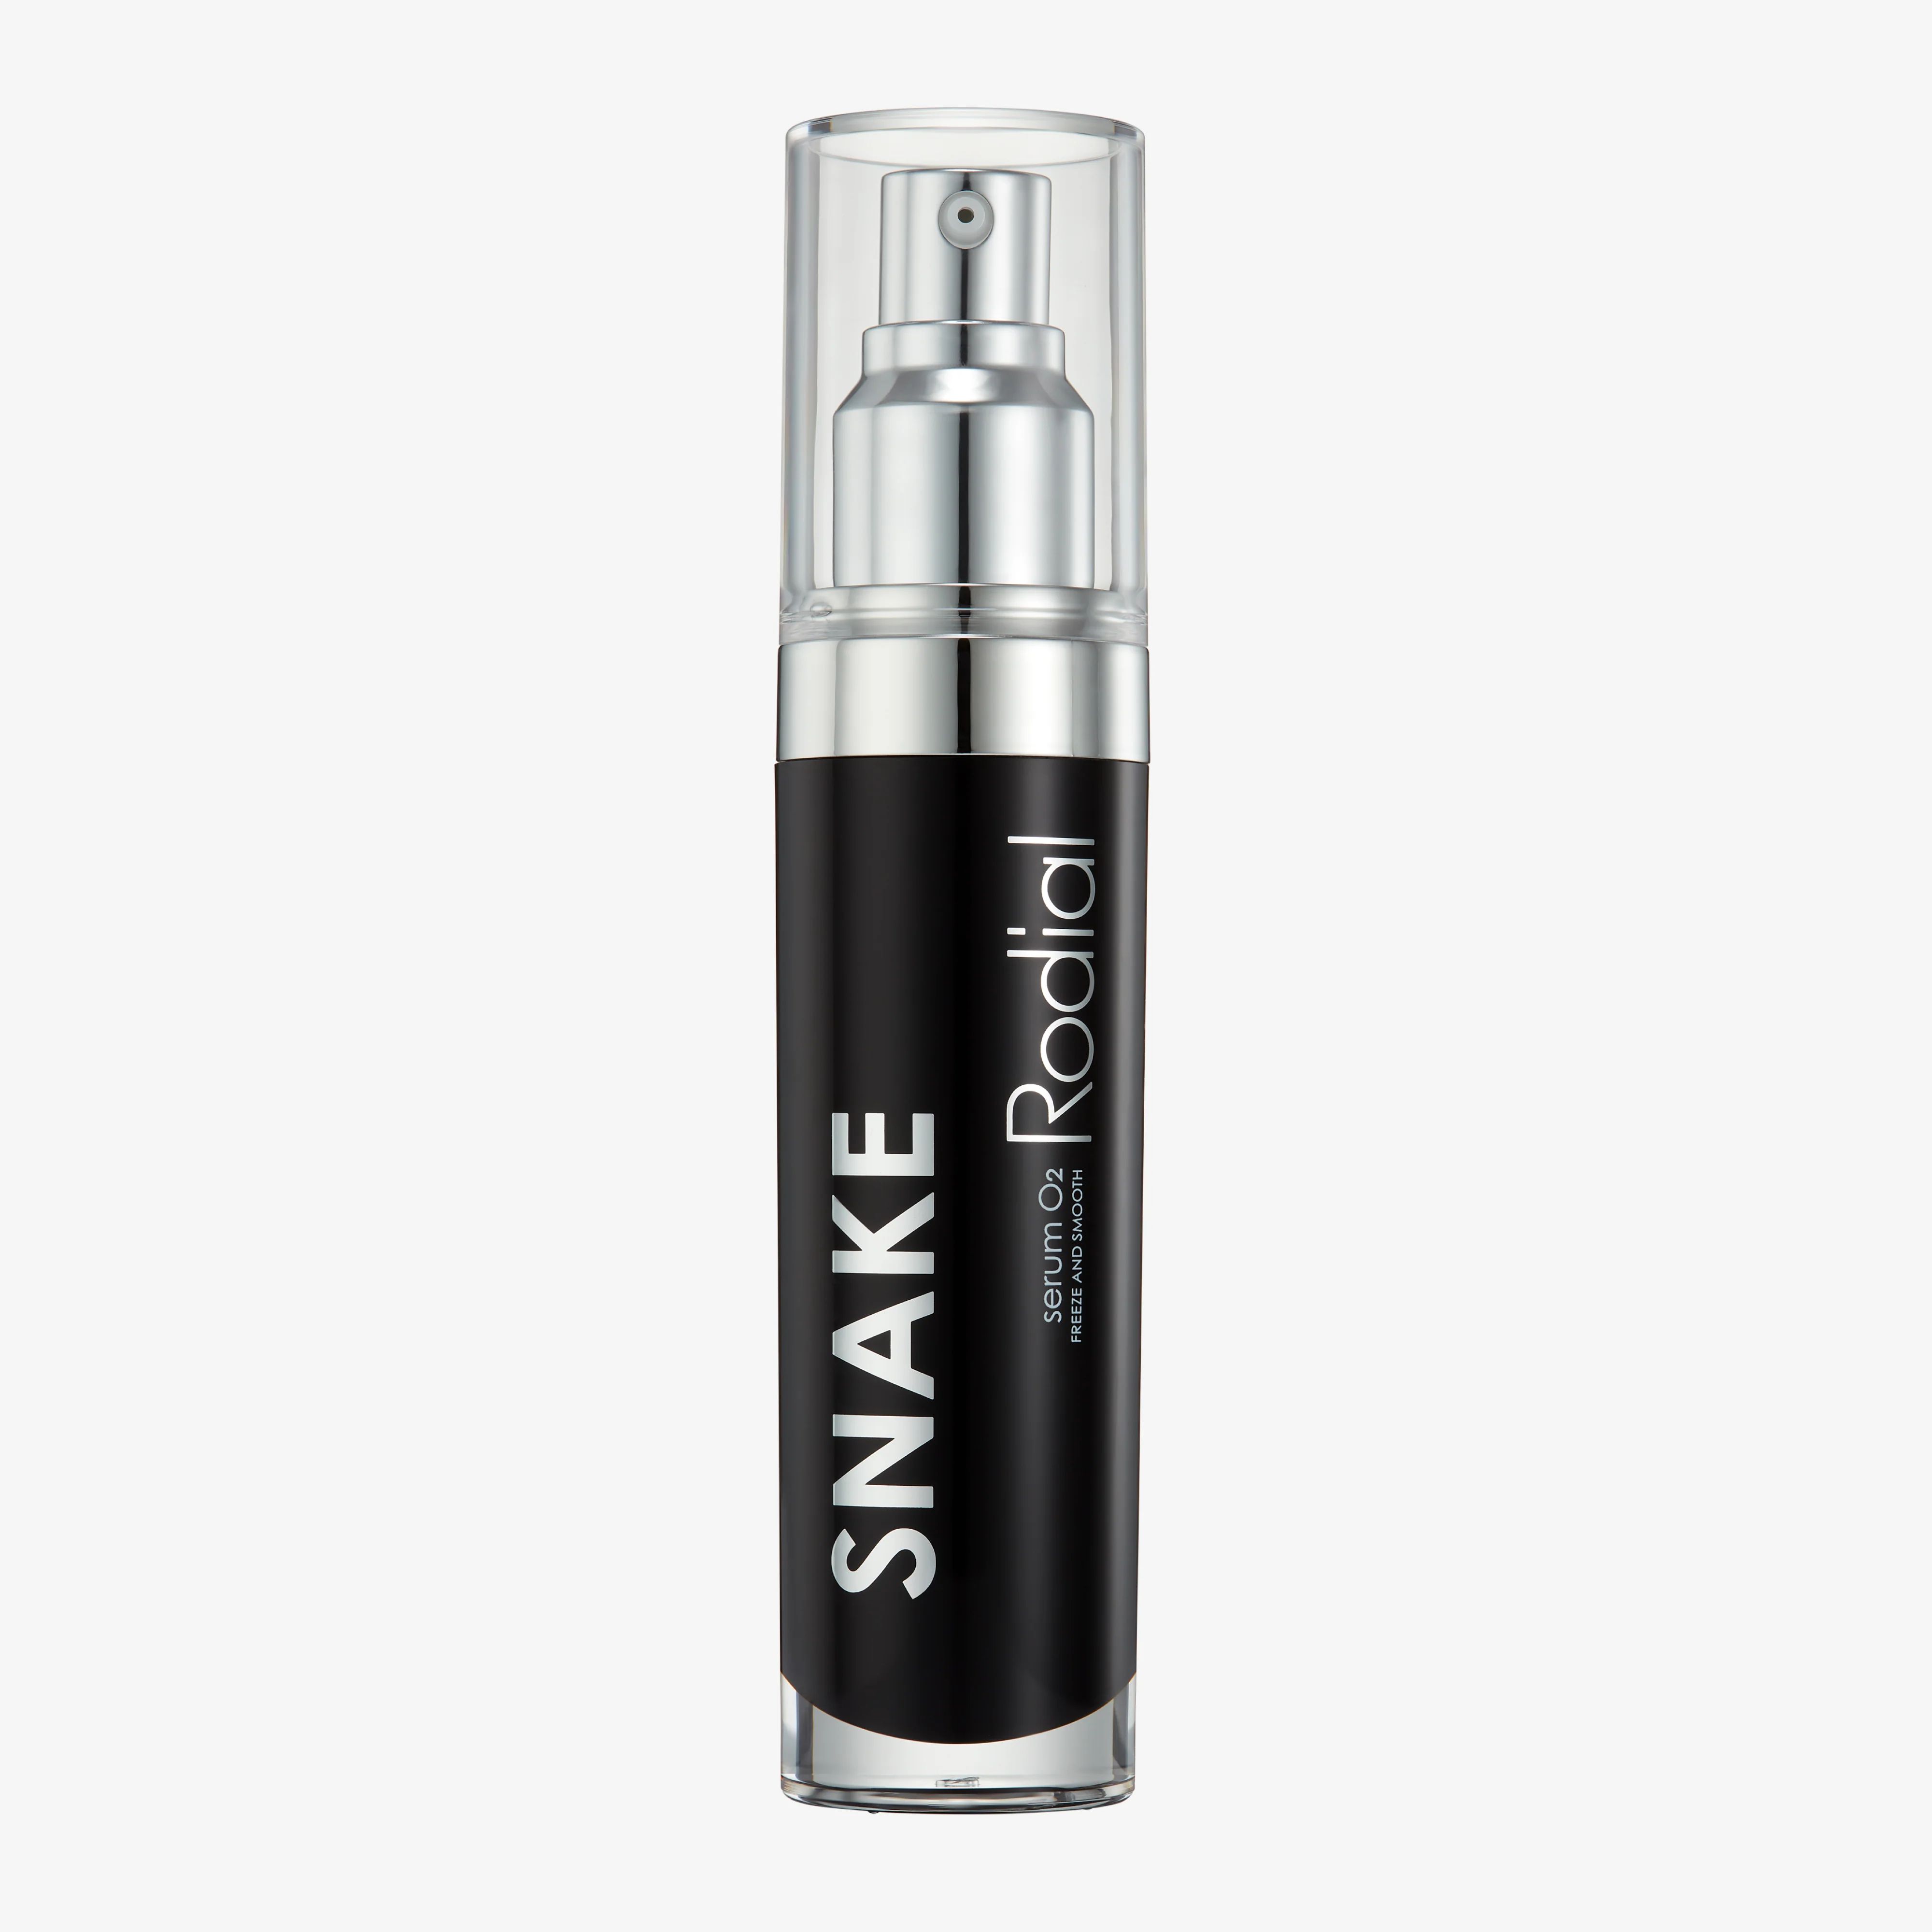 Snake Serum 02 | Rodial Official Store | Rodial